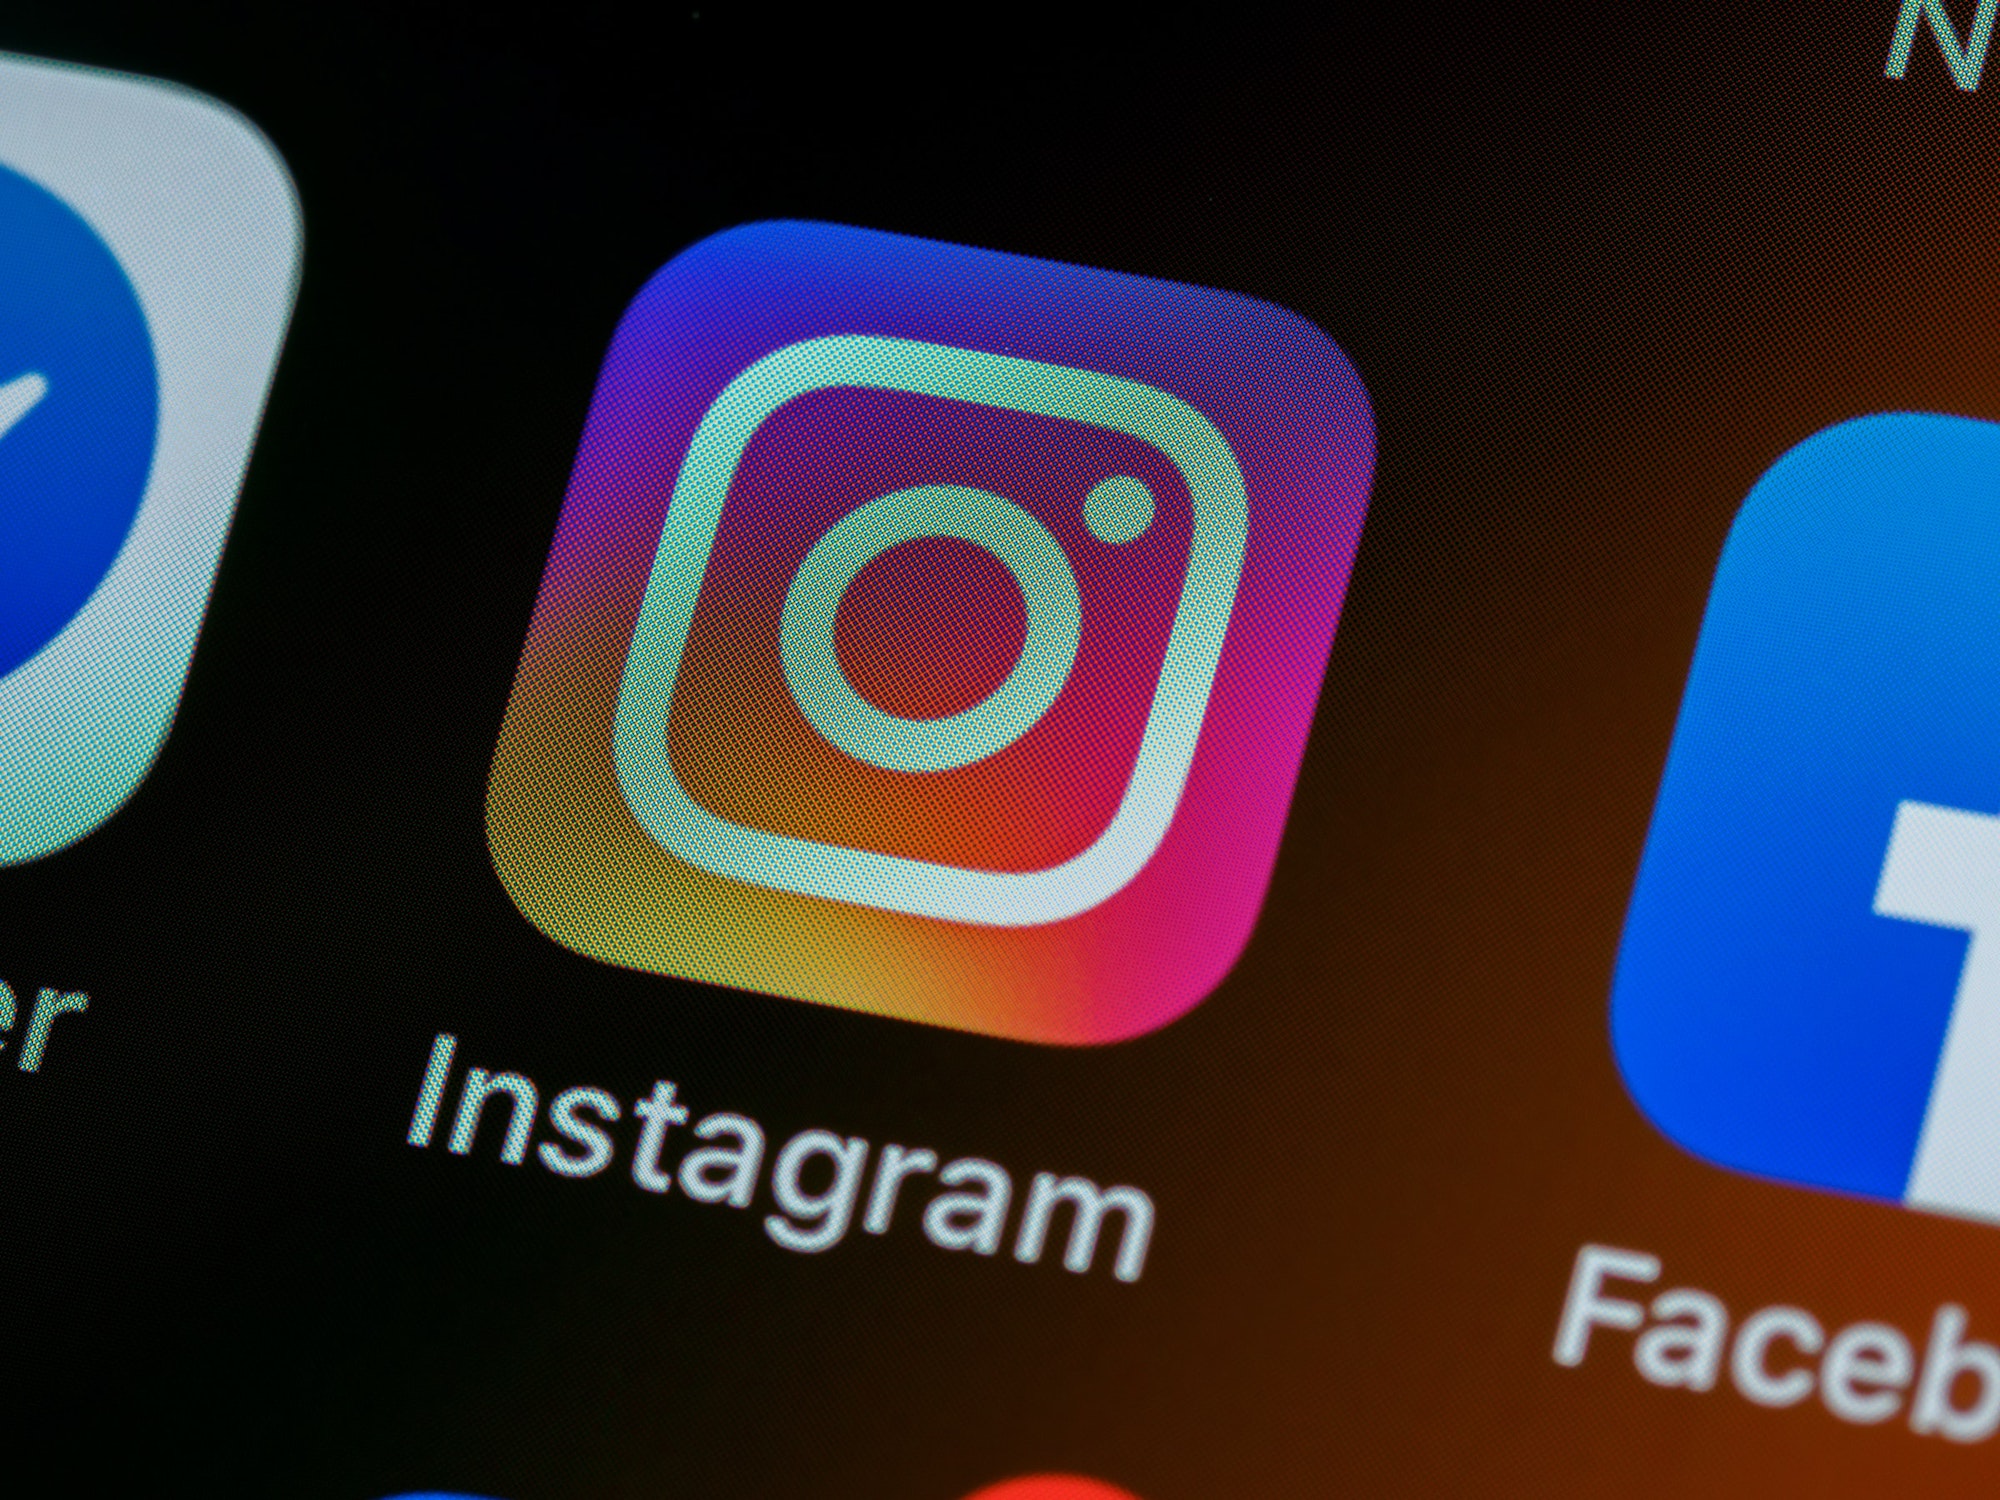 It’s not just you—everyone hates Instagram now. Here’s why.